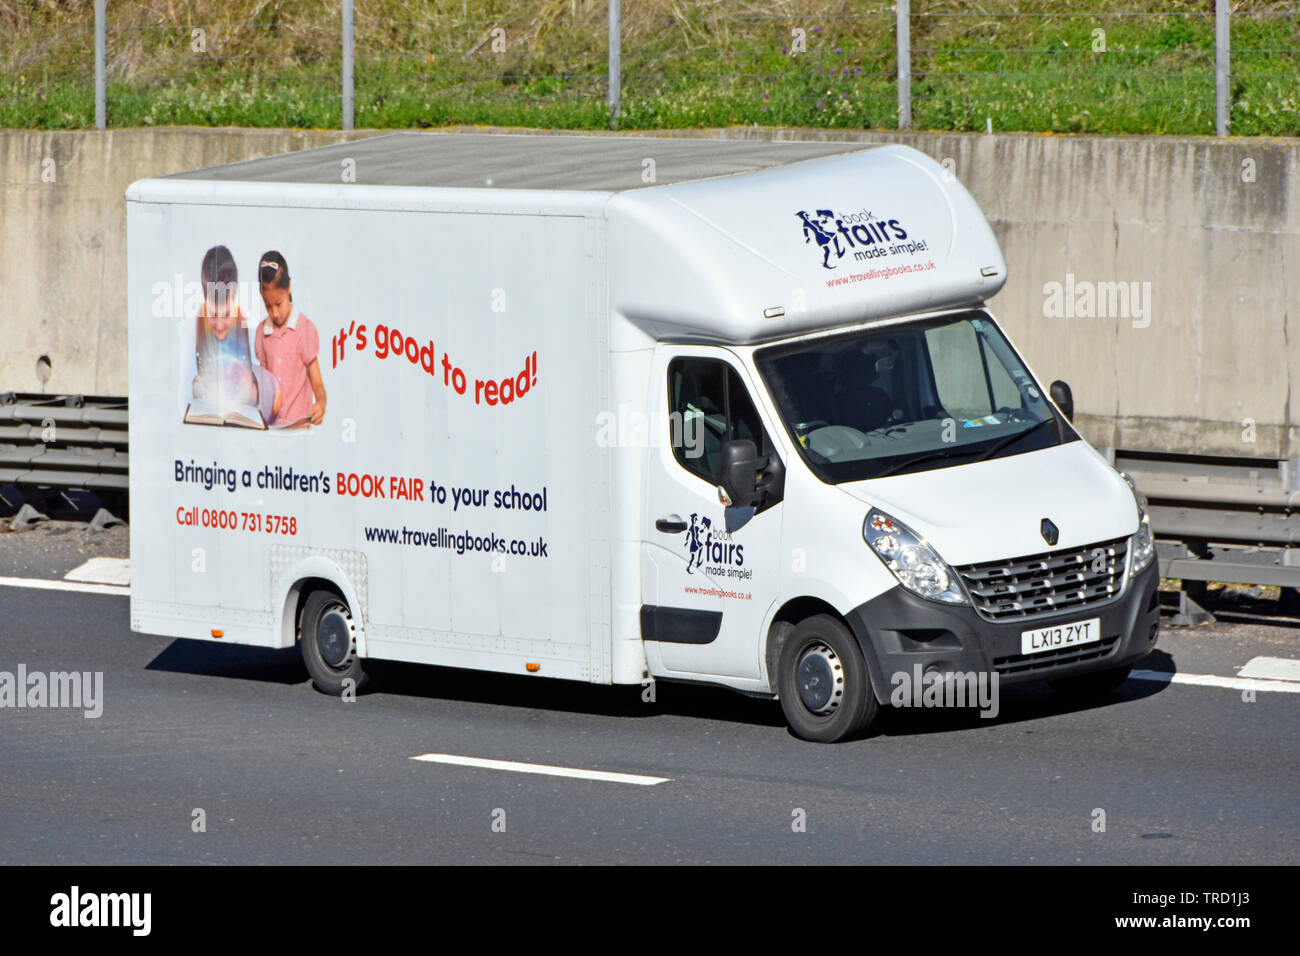 Renault van operated by Travelling Books business supplies for kids reading book fairs in education venue as pop up book shop at school on UK motorway Stock Photo